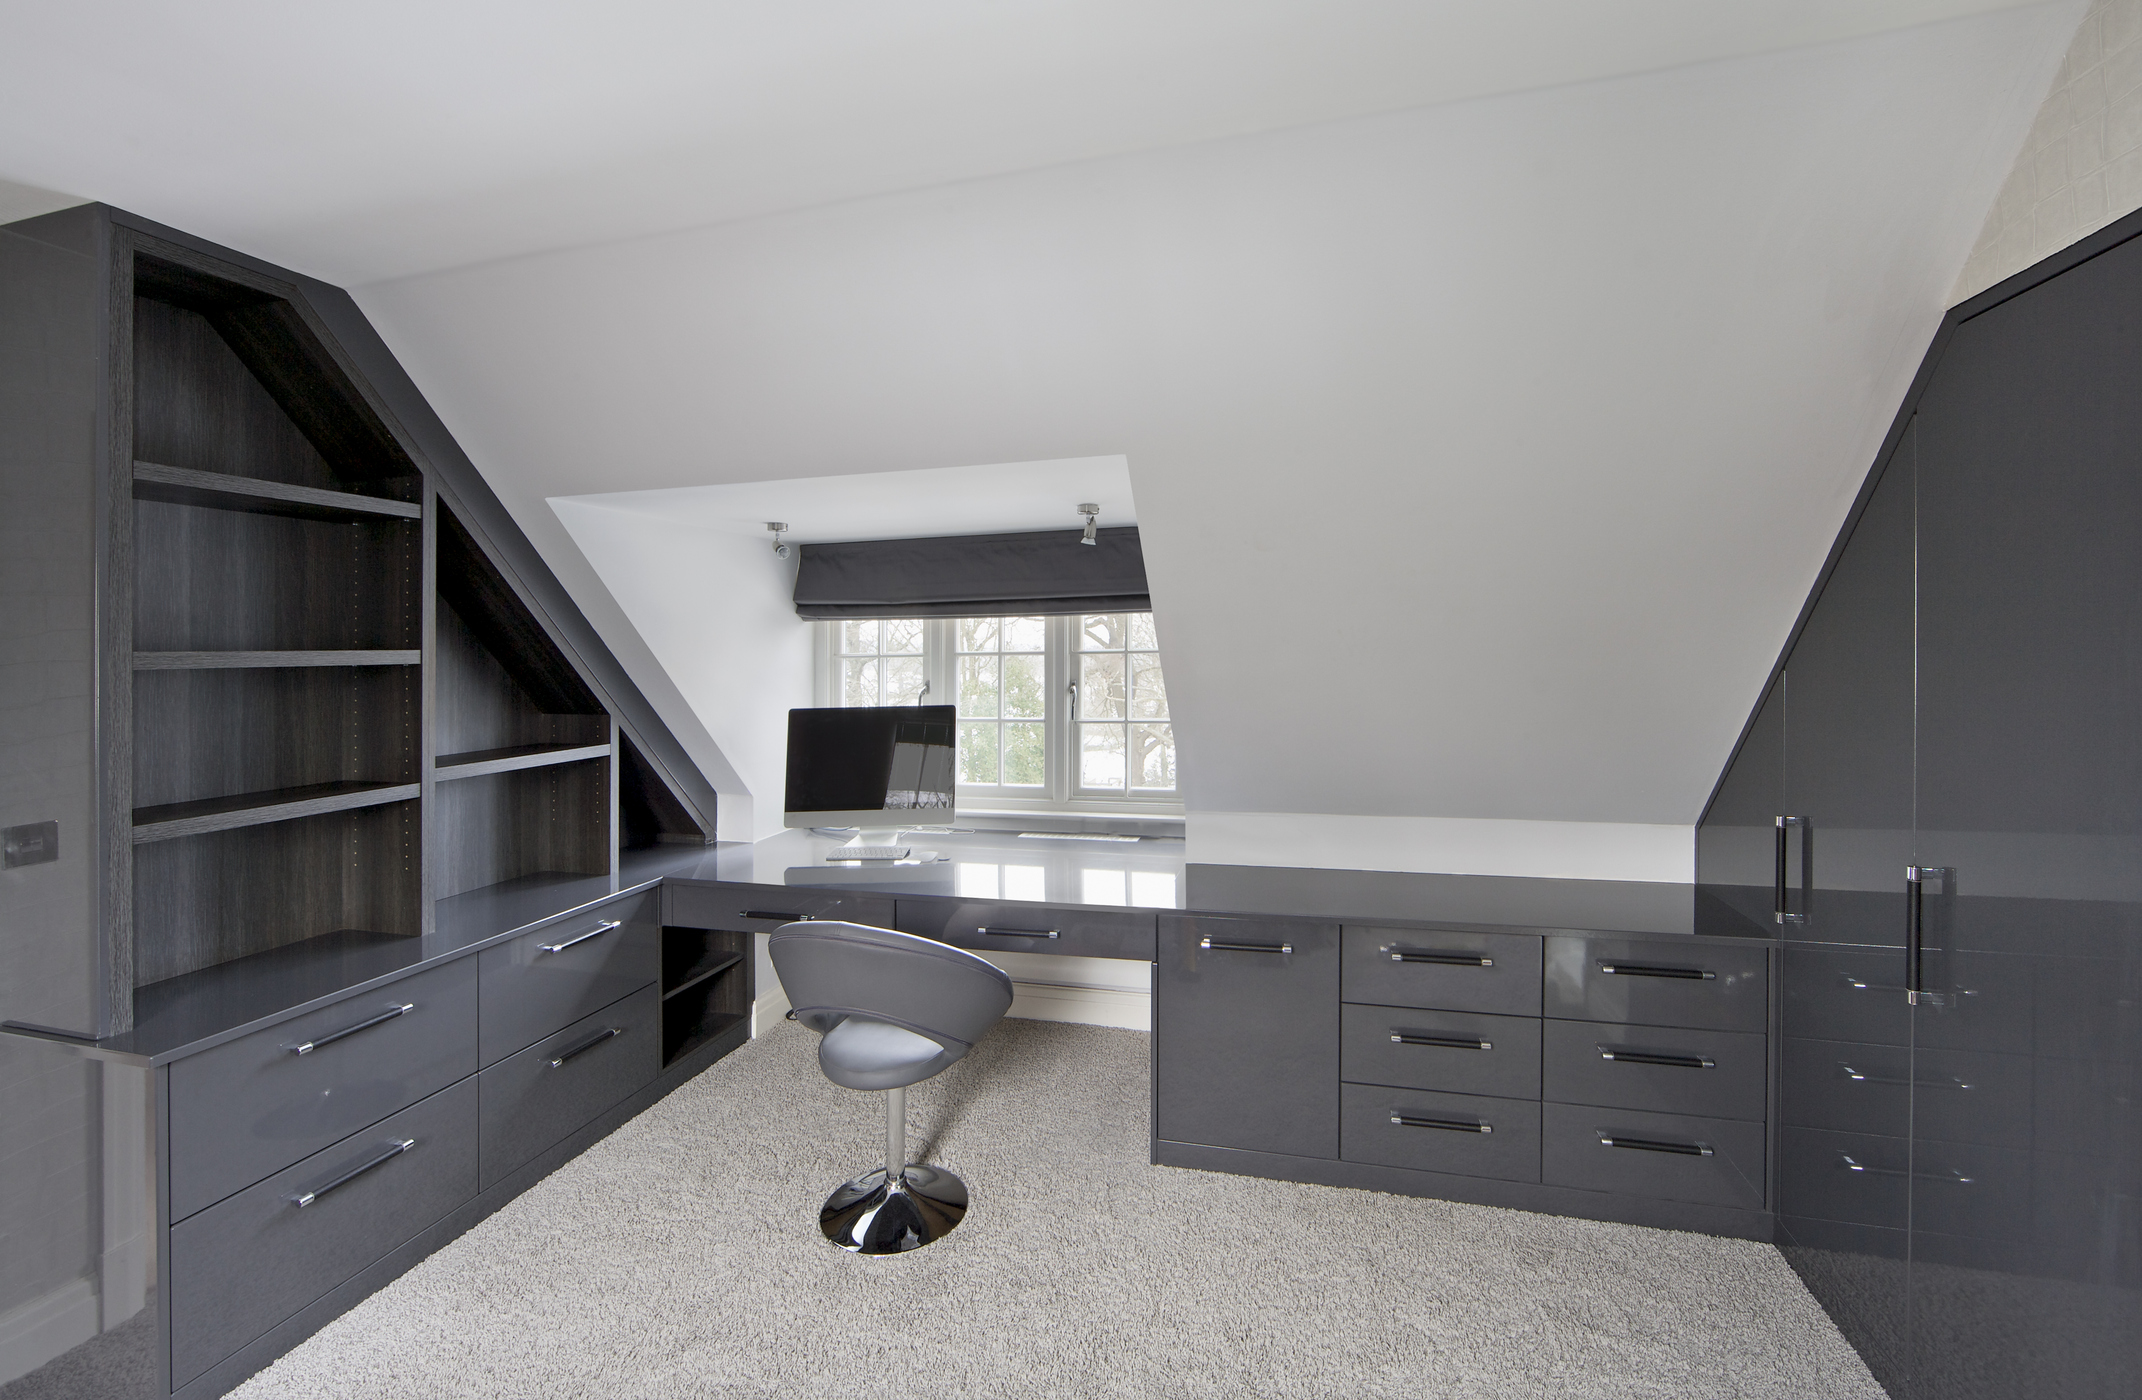 "a bespoke created home office with nicely fitted dark grey shelving, drawers and cupboards. A single operators chair and computer screen have been left to furnish the scene. Looking for a Living Room image Then please see my other Living Room and related images by clicking on the Lightbox link below..."